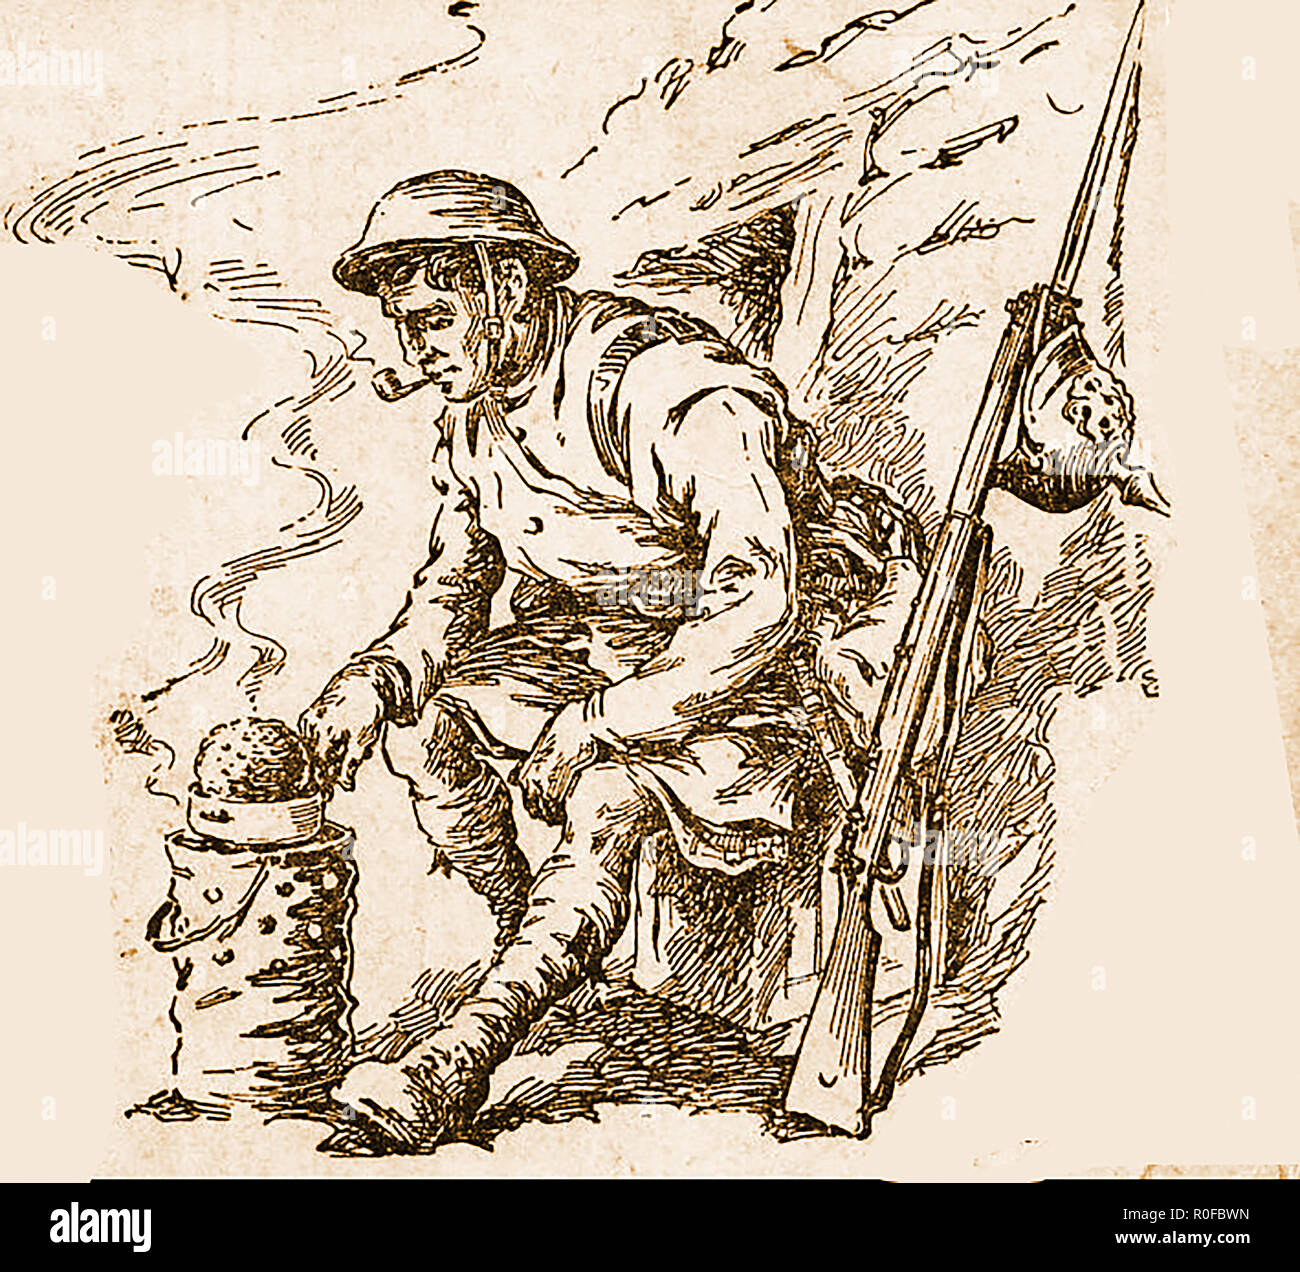 WWI illustration - A British soldier cooking on a makeshift stove with a pipe in his mouth and a trophy German helmet on his fixed bayonet Stock Photo